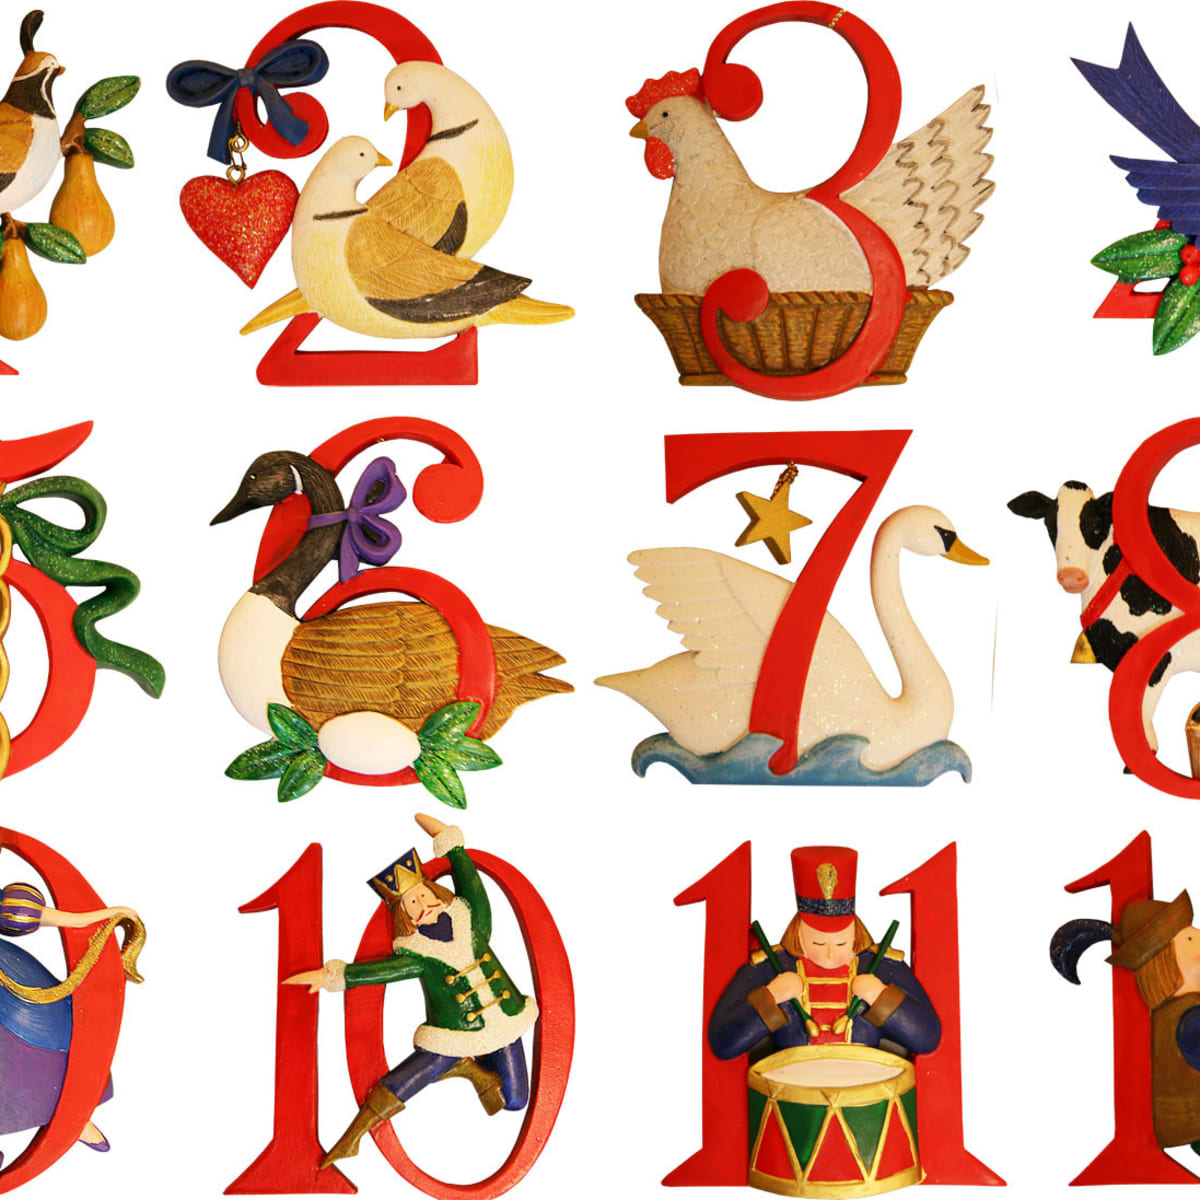 What Are the 12 Days of Christmas? | HowStuffWorks